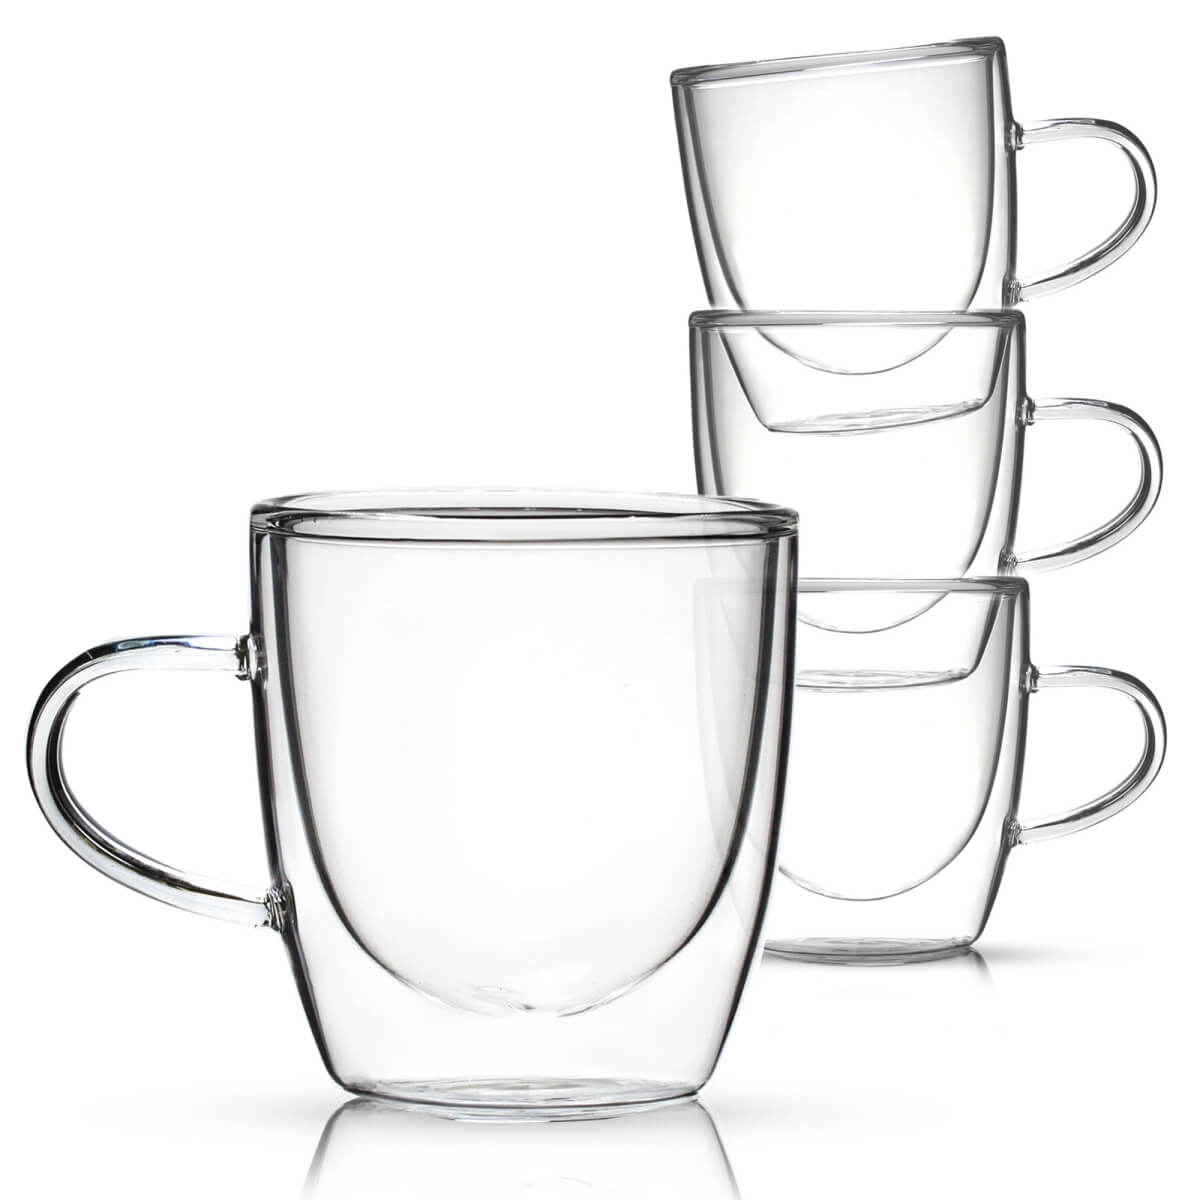 Stylusella Double Wall Glass Espresso Cups 5oz/150ml, A Set of 2, Thermo Insulated Borosilicate Glass Cups with Handle